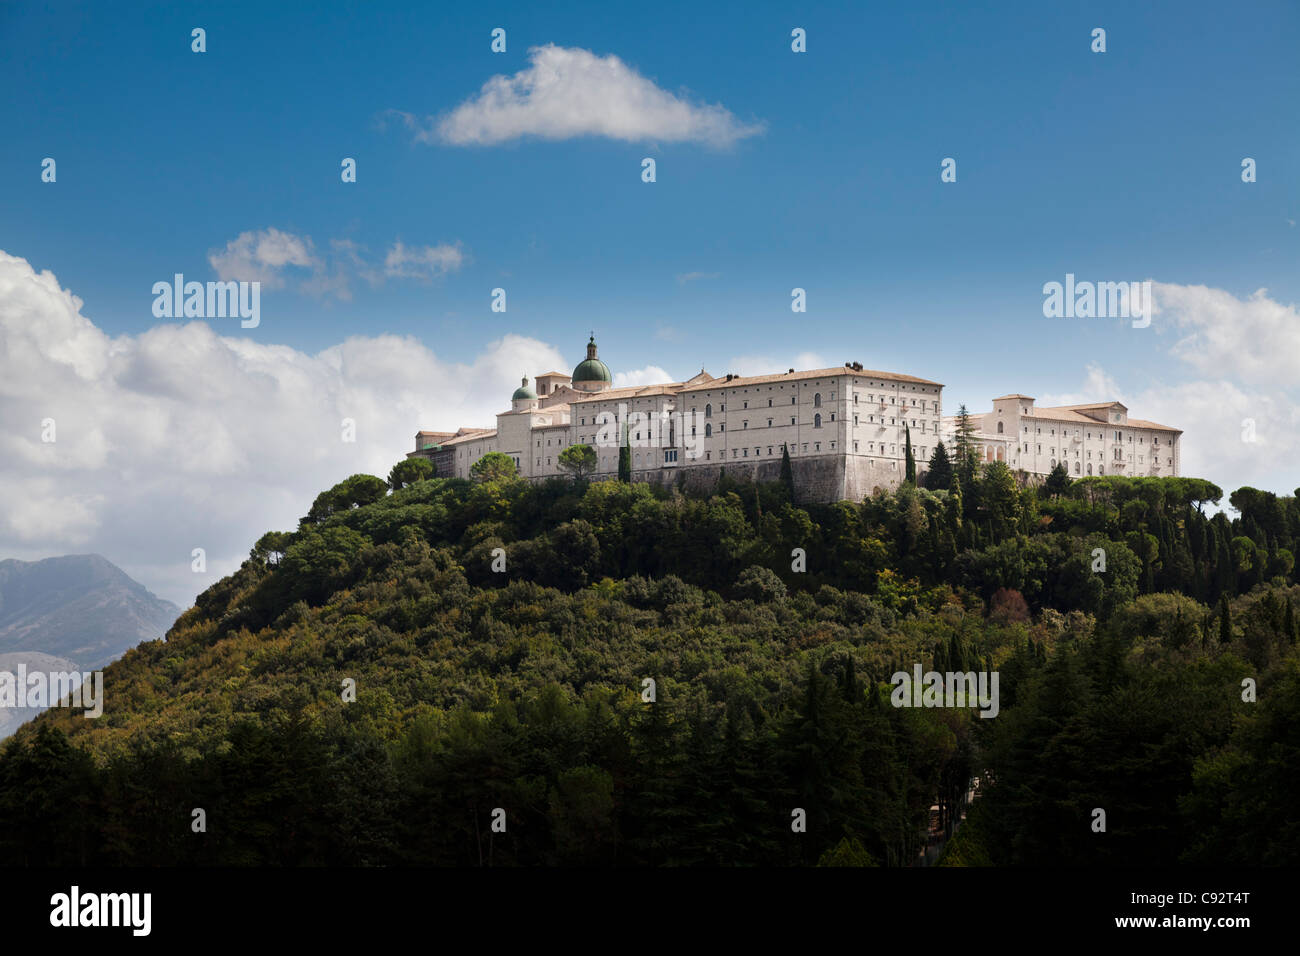 The Rebuilt Monte Cassino Abbey On Top Of The Mountain In Italy Stock Photo Alamy